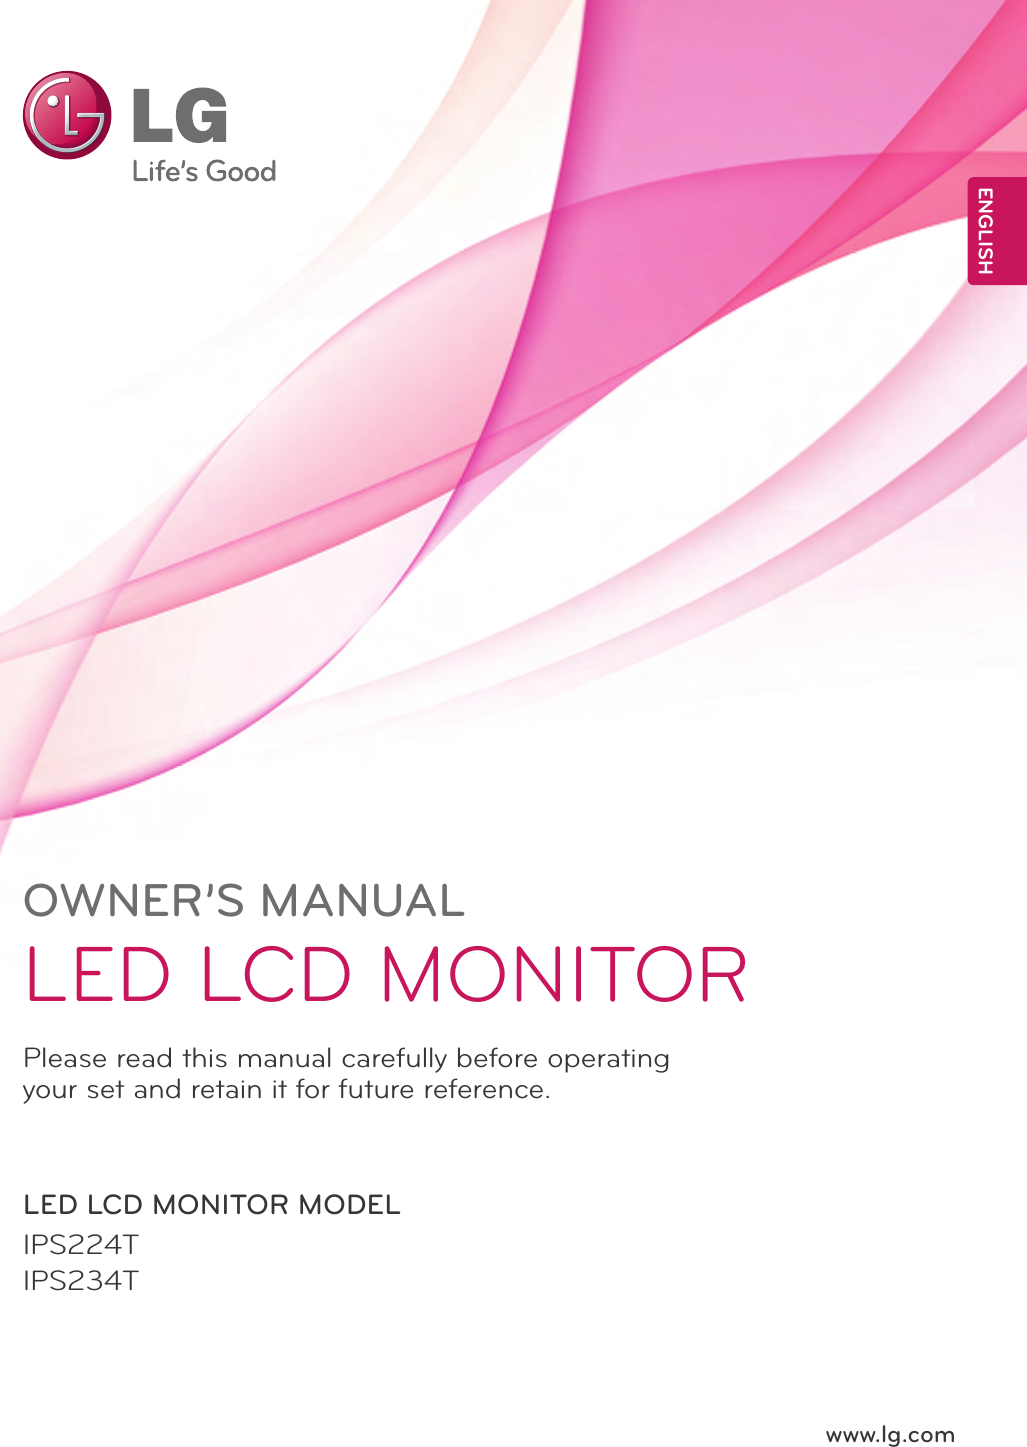 www.lg.comOWNER’S MANUALLED LCD MONITORIPS224TIPS234TPlease read this manual carefully before operating your set and retain it for future reference.LED LCD MONITOR MODELENGLISH